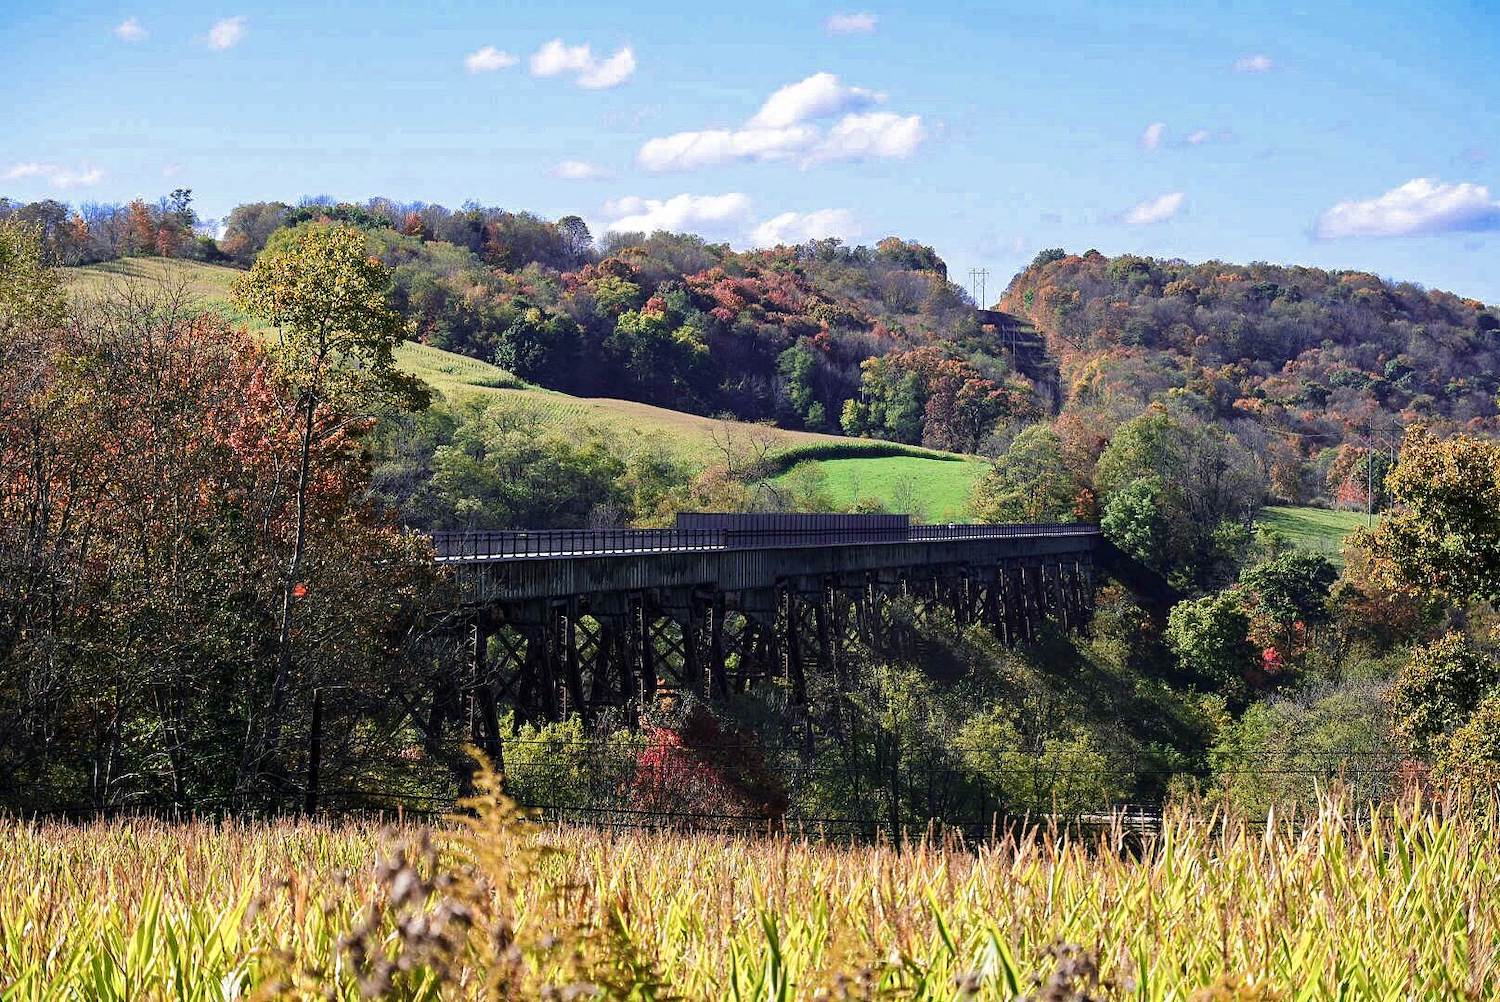 Maryland's Great Allegheny Passage (gaptrail.org) | Photo by Hilary Dunning